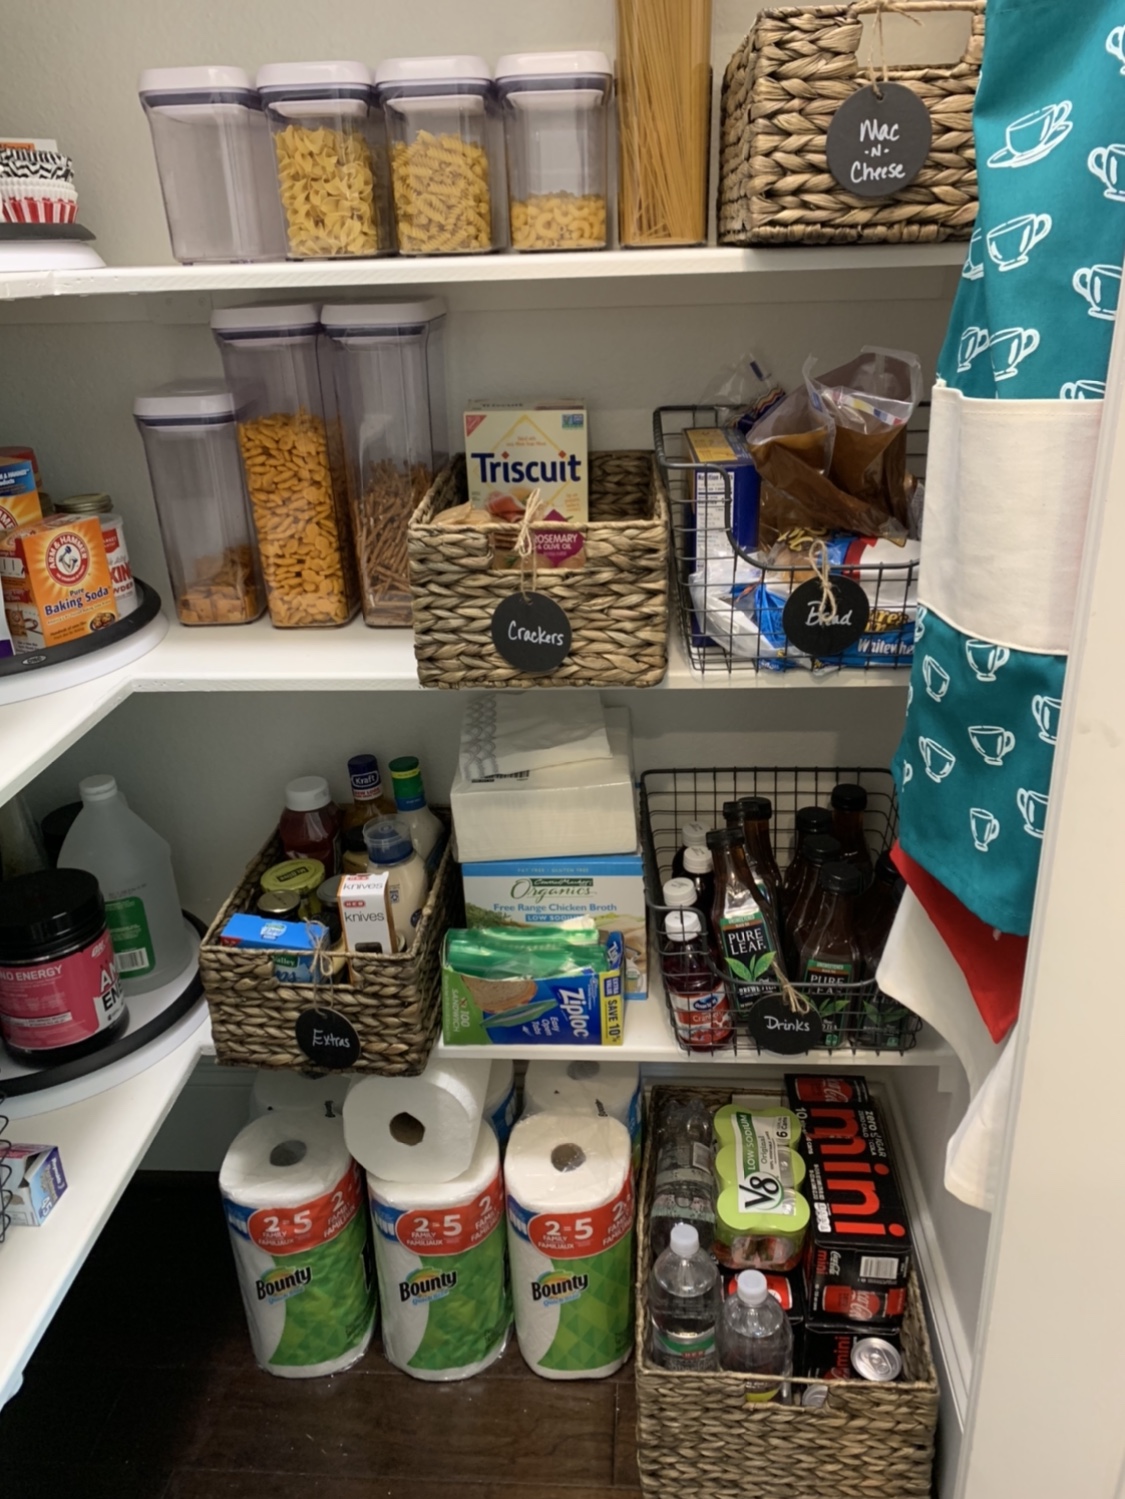 How to Organize a Deep Pantry — Think Outside the Closet - Houston